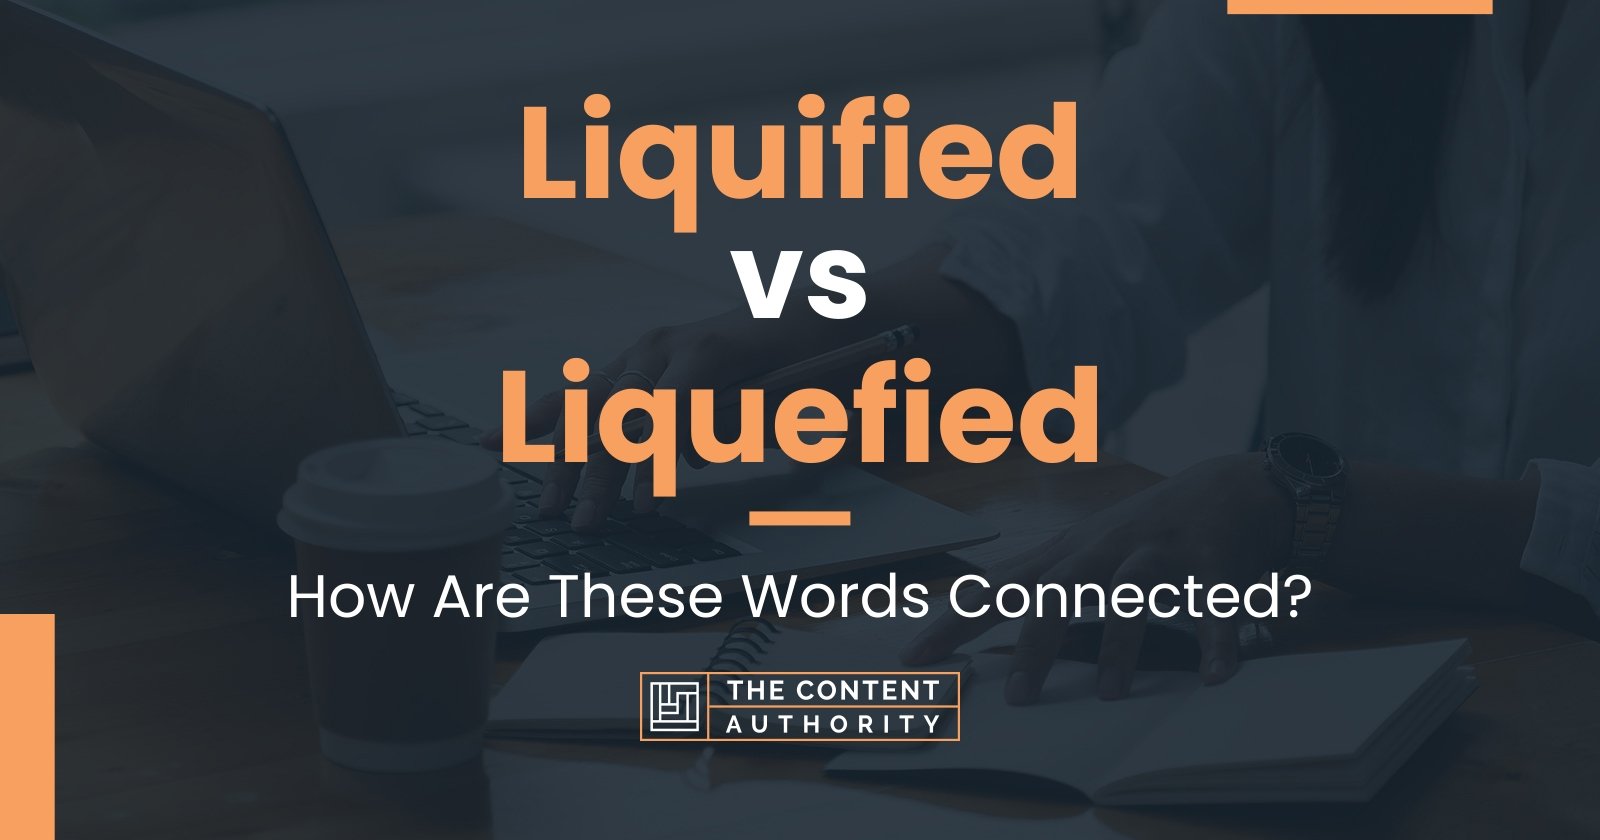 Liquified vs Liquefied: How Are These Words Connected?